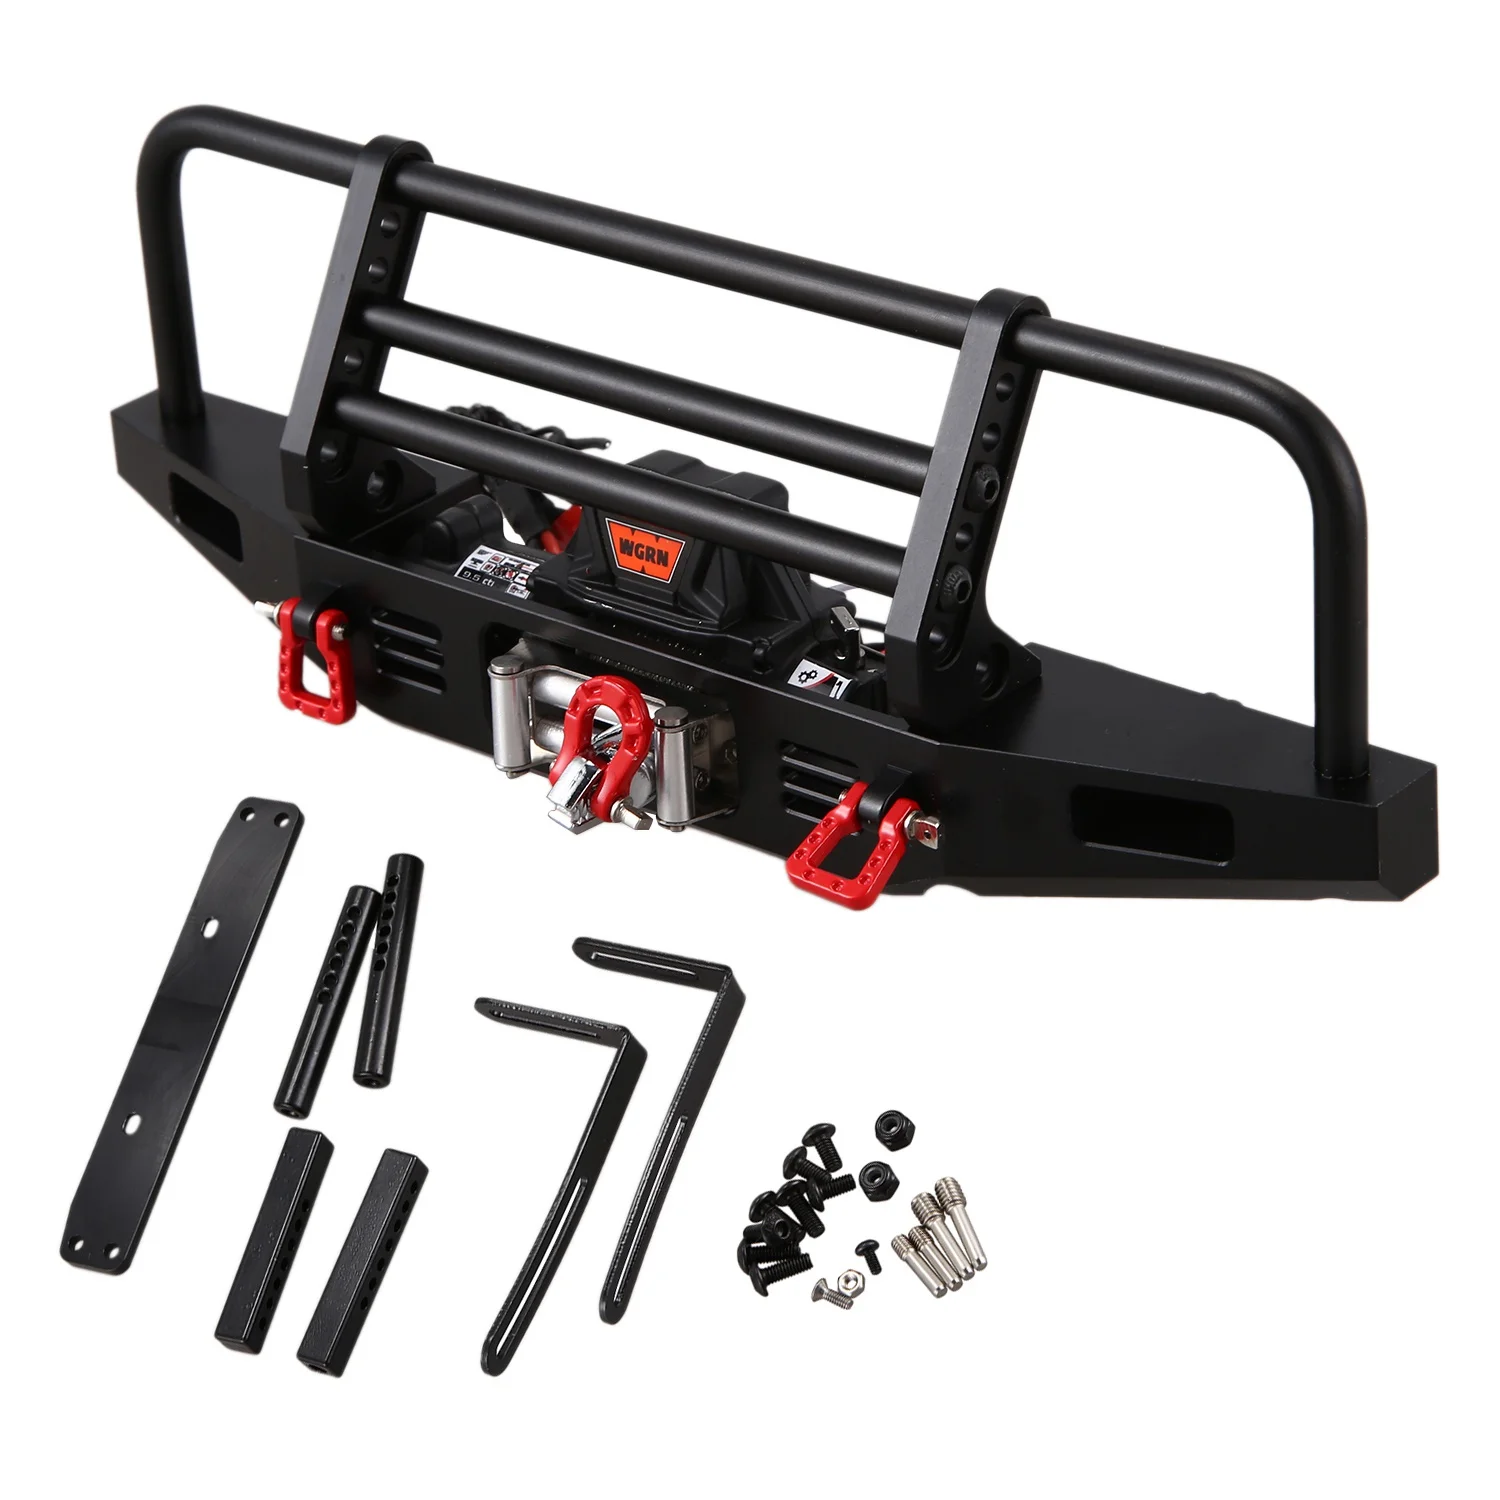 

Metal Front Bumper with Winch Remote Controller System for 1/10 RC Crawler Traxxas TRX4 Axial SCX10 & SCX10 II 90046